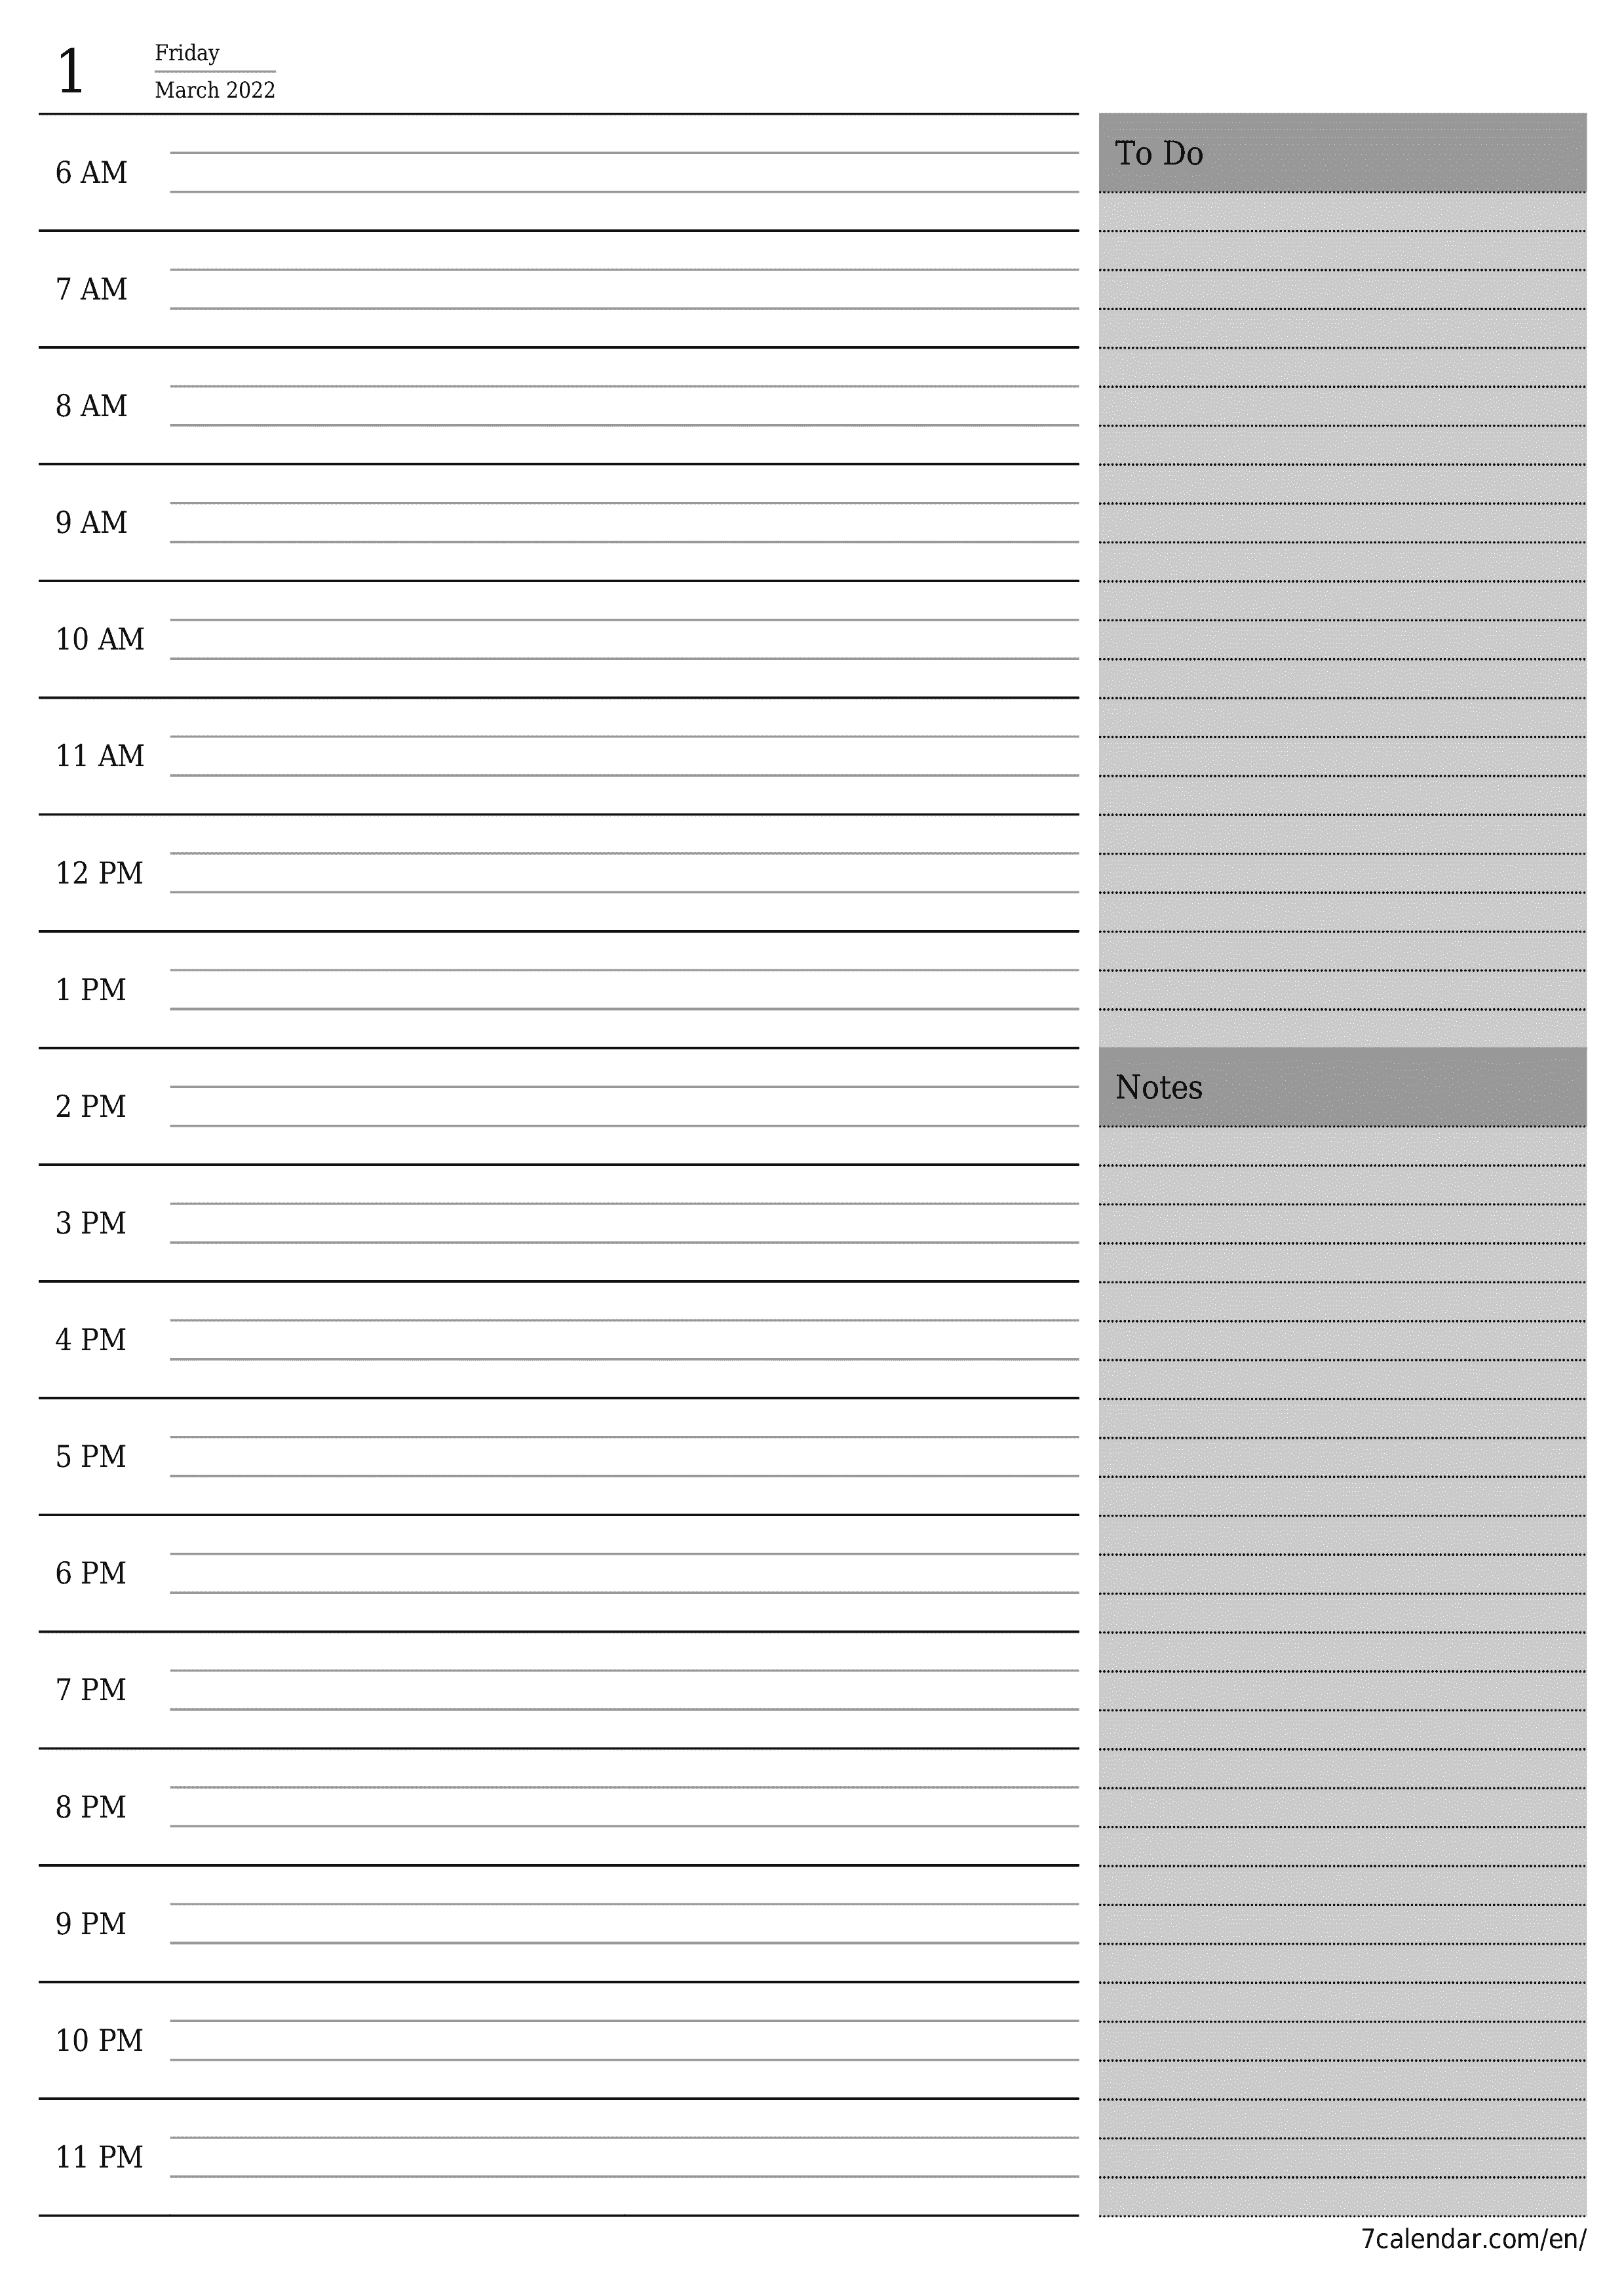 printable wall template free vertical Daily planner calendar March (Mar) 2022